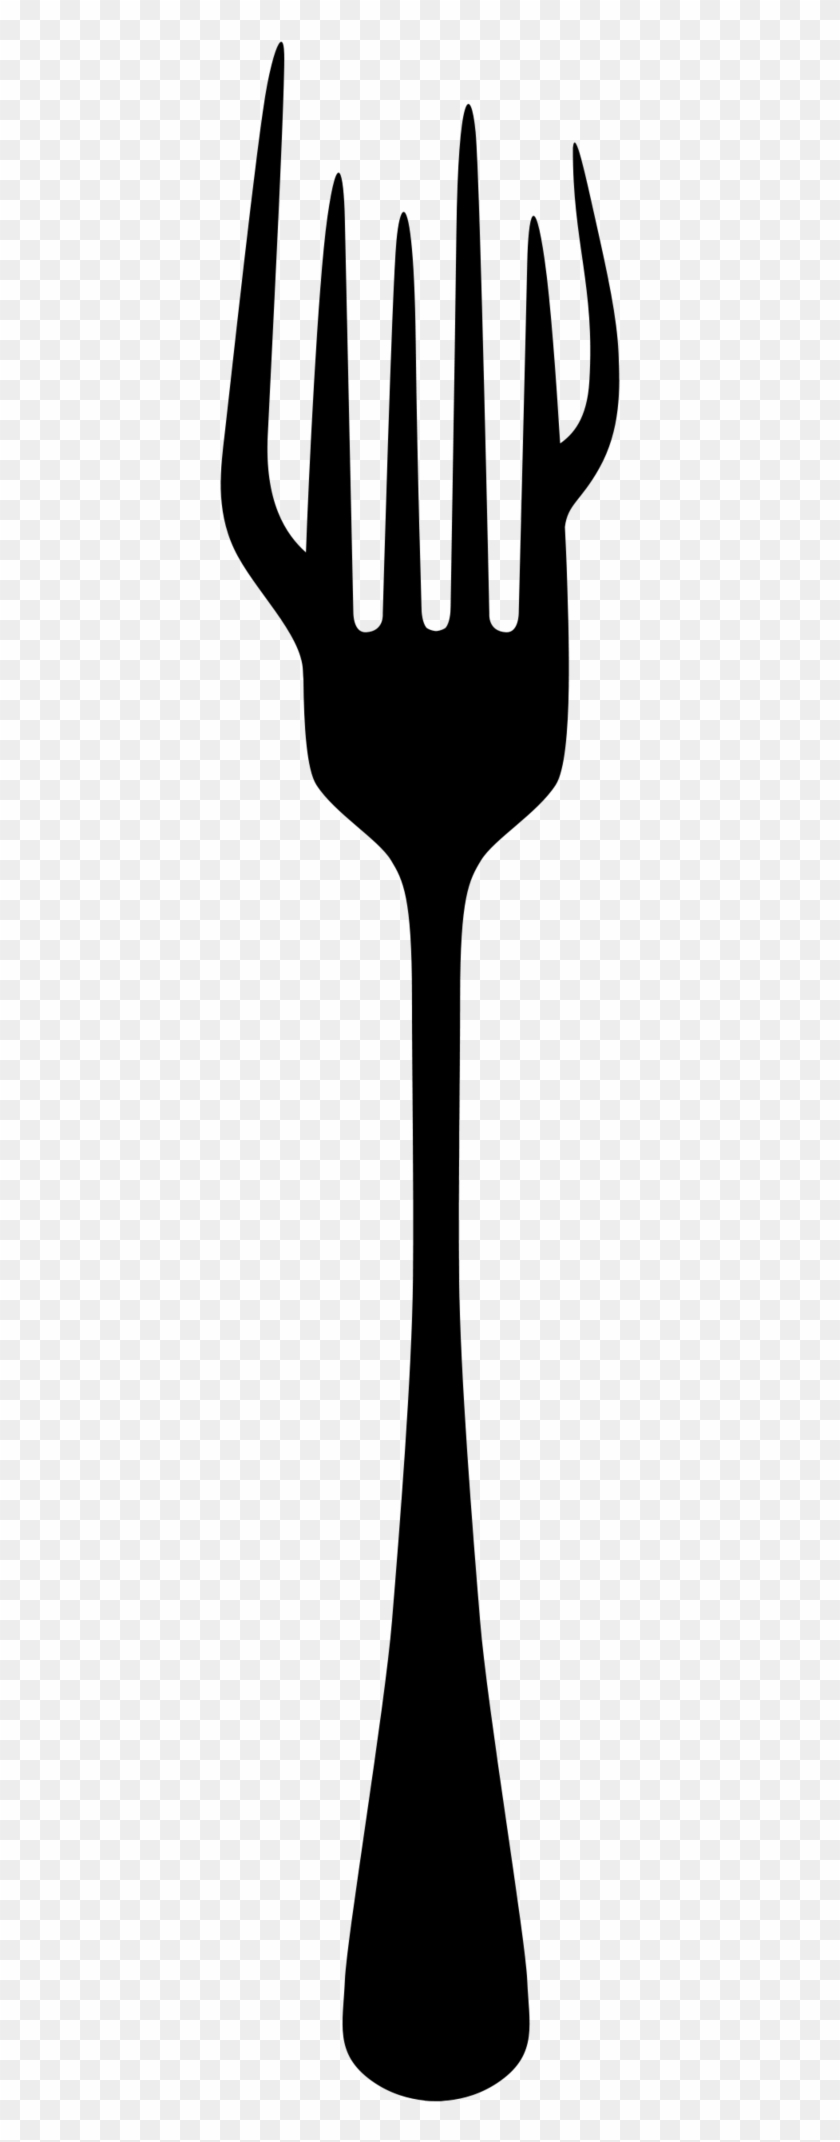 Fork And Open Source Svg Vector File, Vector Clip Art - Portable Network Graphics #129865